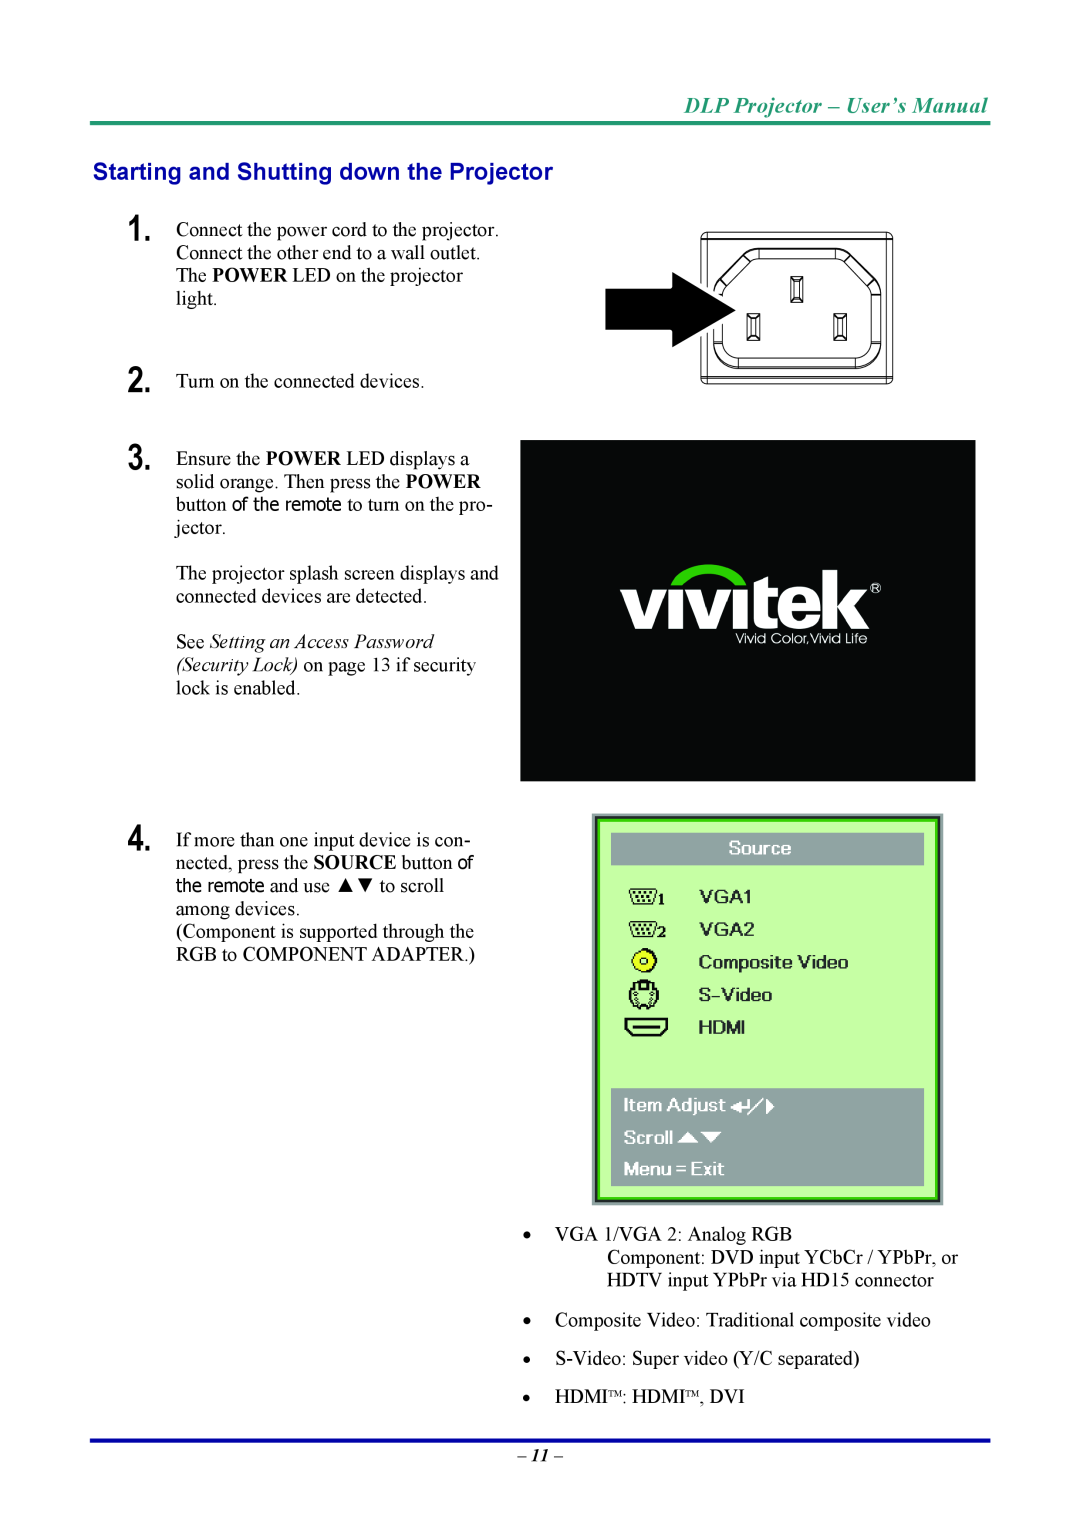 Vivitek D7 user manual Starting and Shutting down the Projector, DLP Projector - User’s Manual 